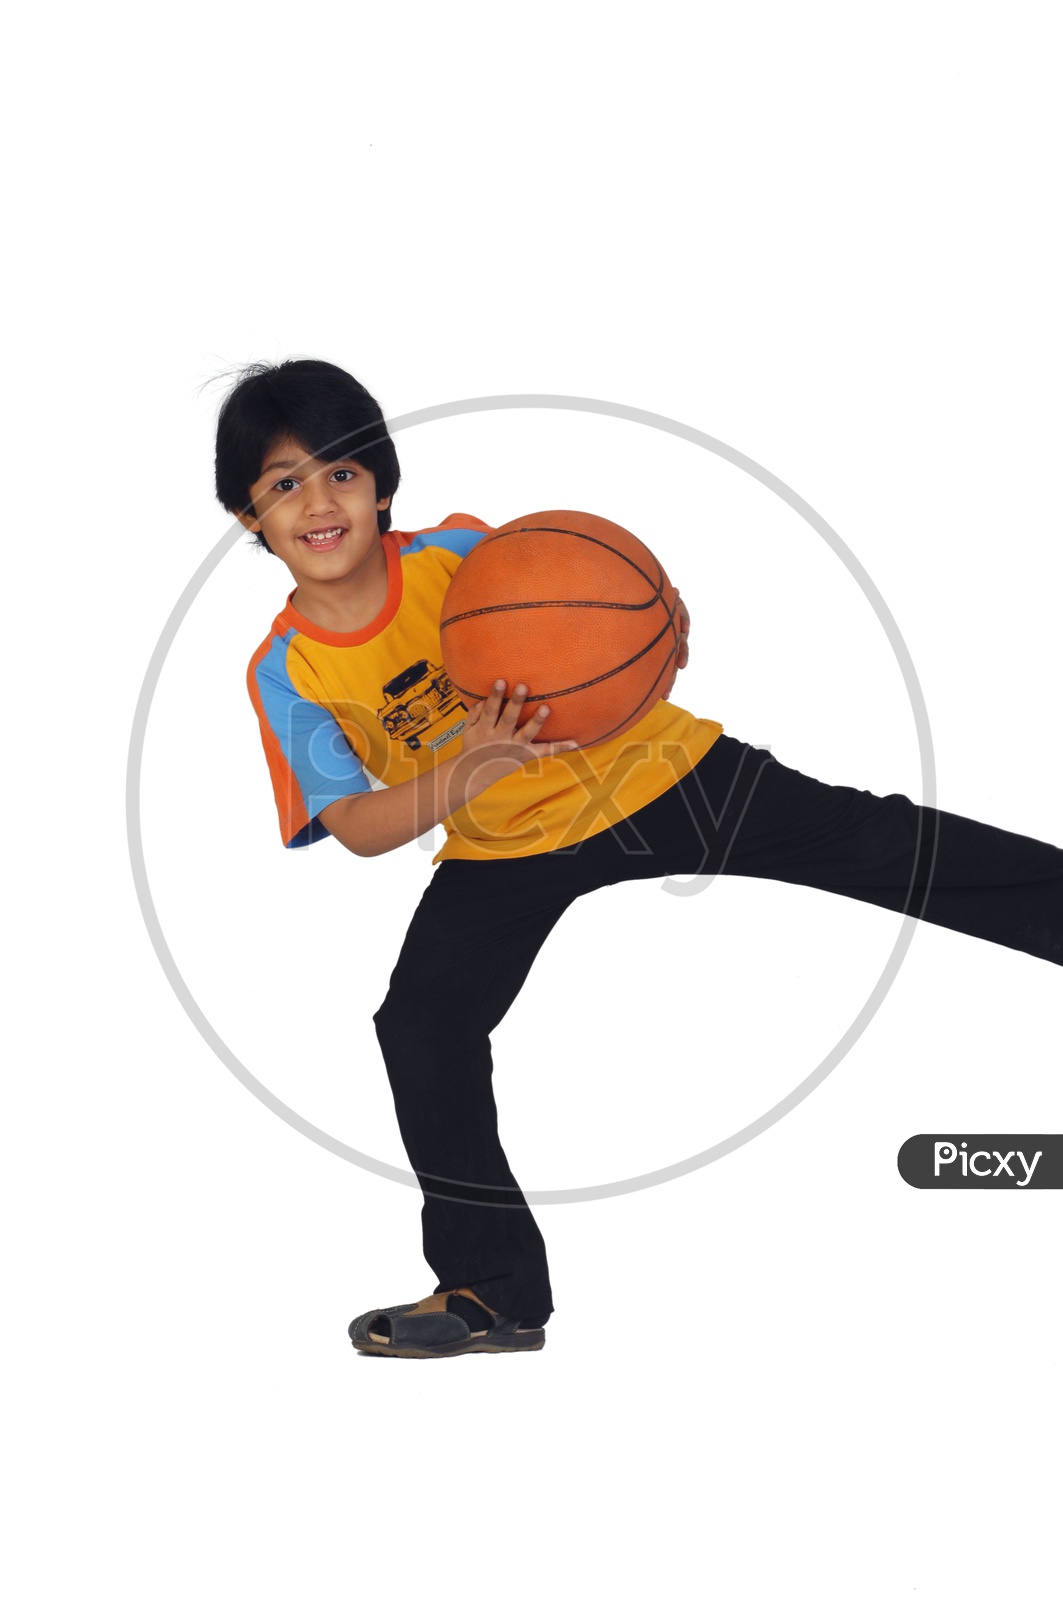 Indian child boy in fancy dress costume of basketball player with basket  ball ; India ; Asia ; MR#499 Stock Photo - Alamy